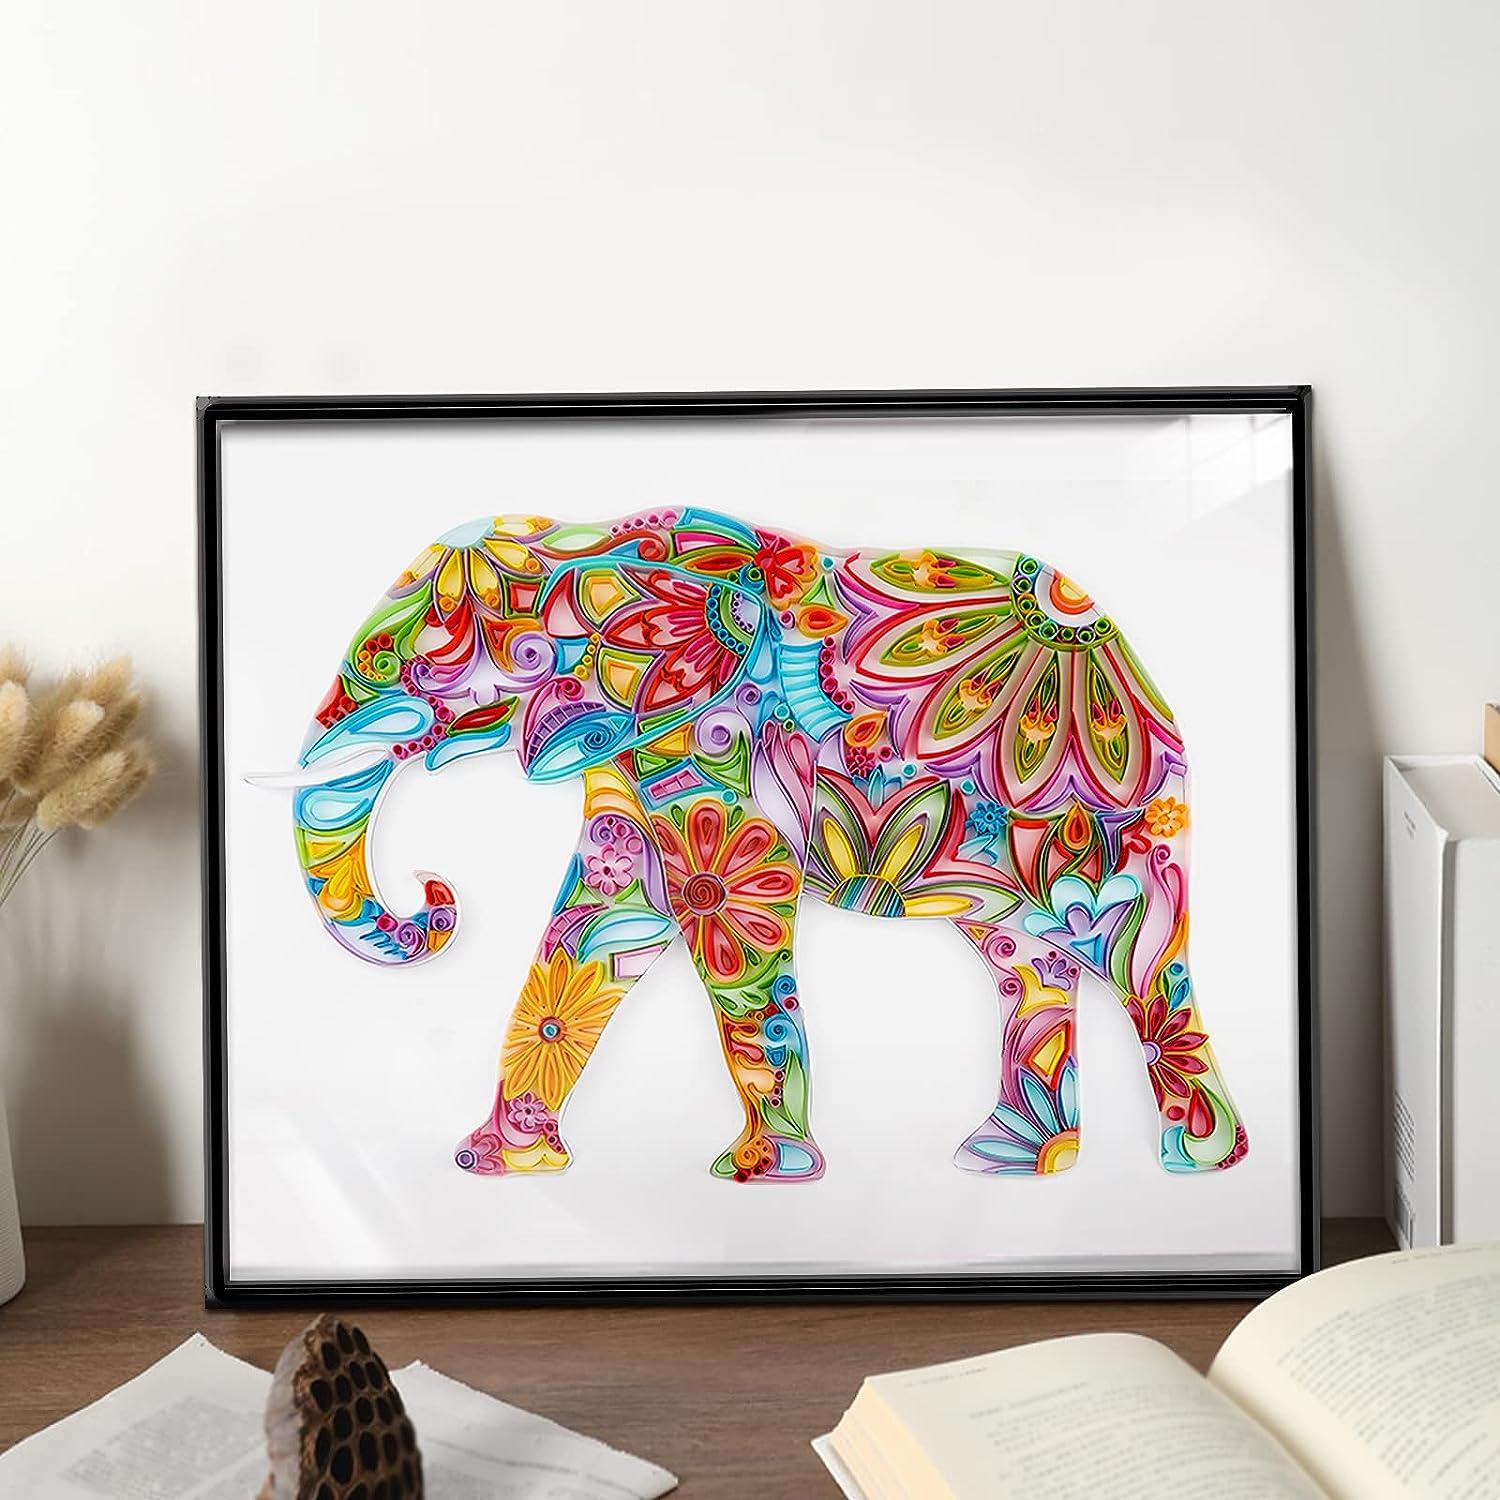 Uniquilling Quilling Paper Quilling Kit for Adults Beginner 16*20-inch  Bohemian Elephant Exquisite DIY Paper Filigree Painting Kits Quilling Tools  Home Room Wall Art Decor Best Gifts(Basic)